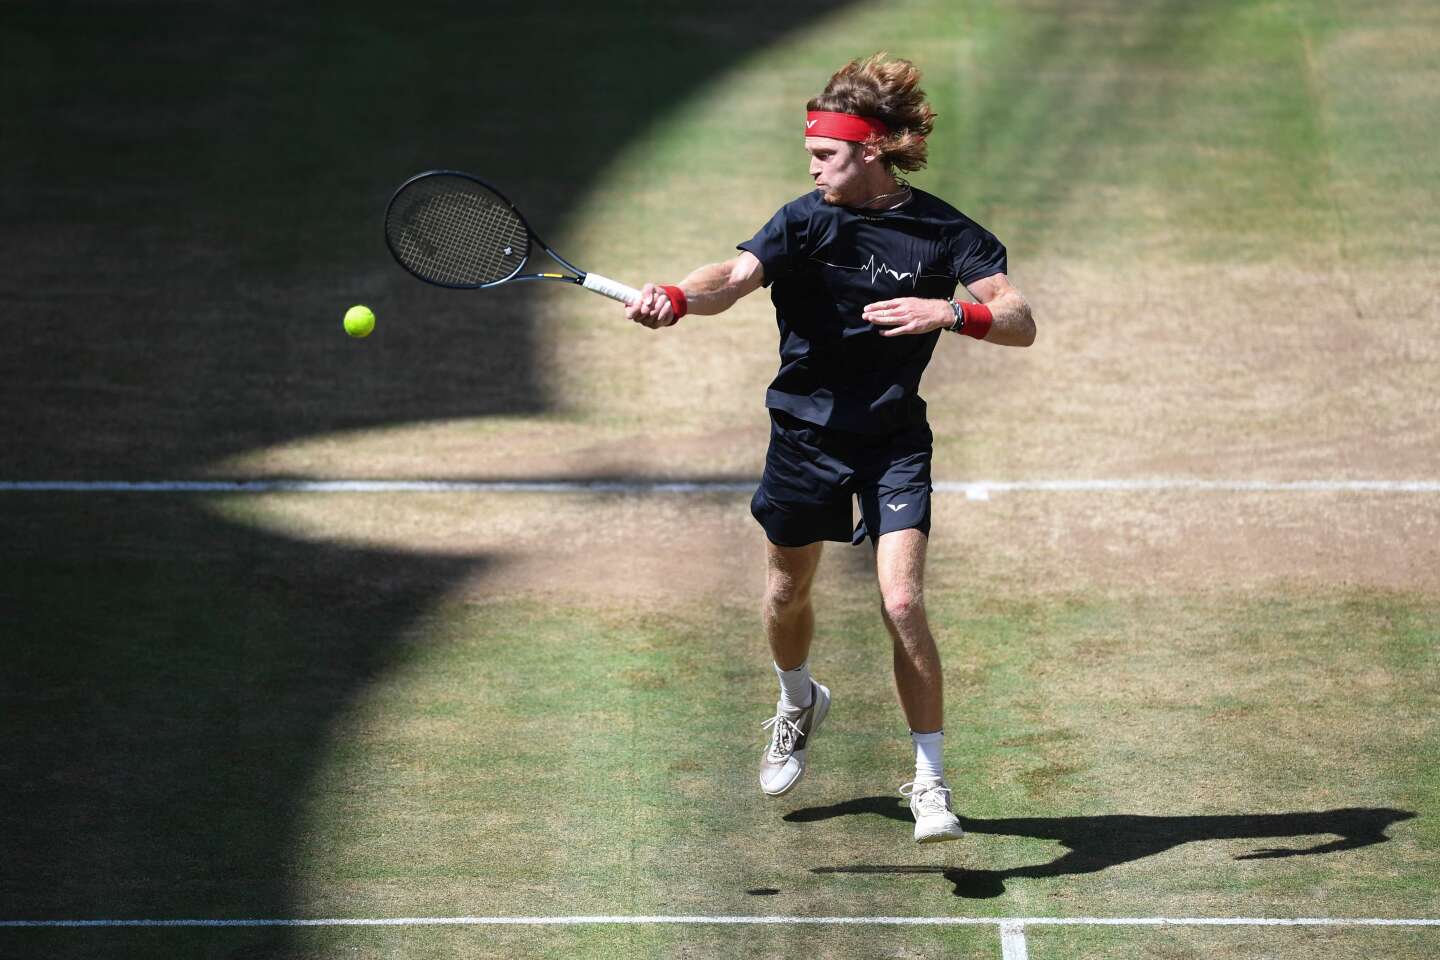 Wimbledon Russias Rublev returns to London chasing lost time